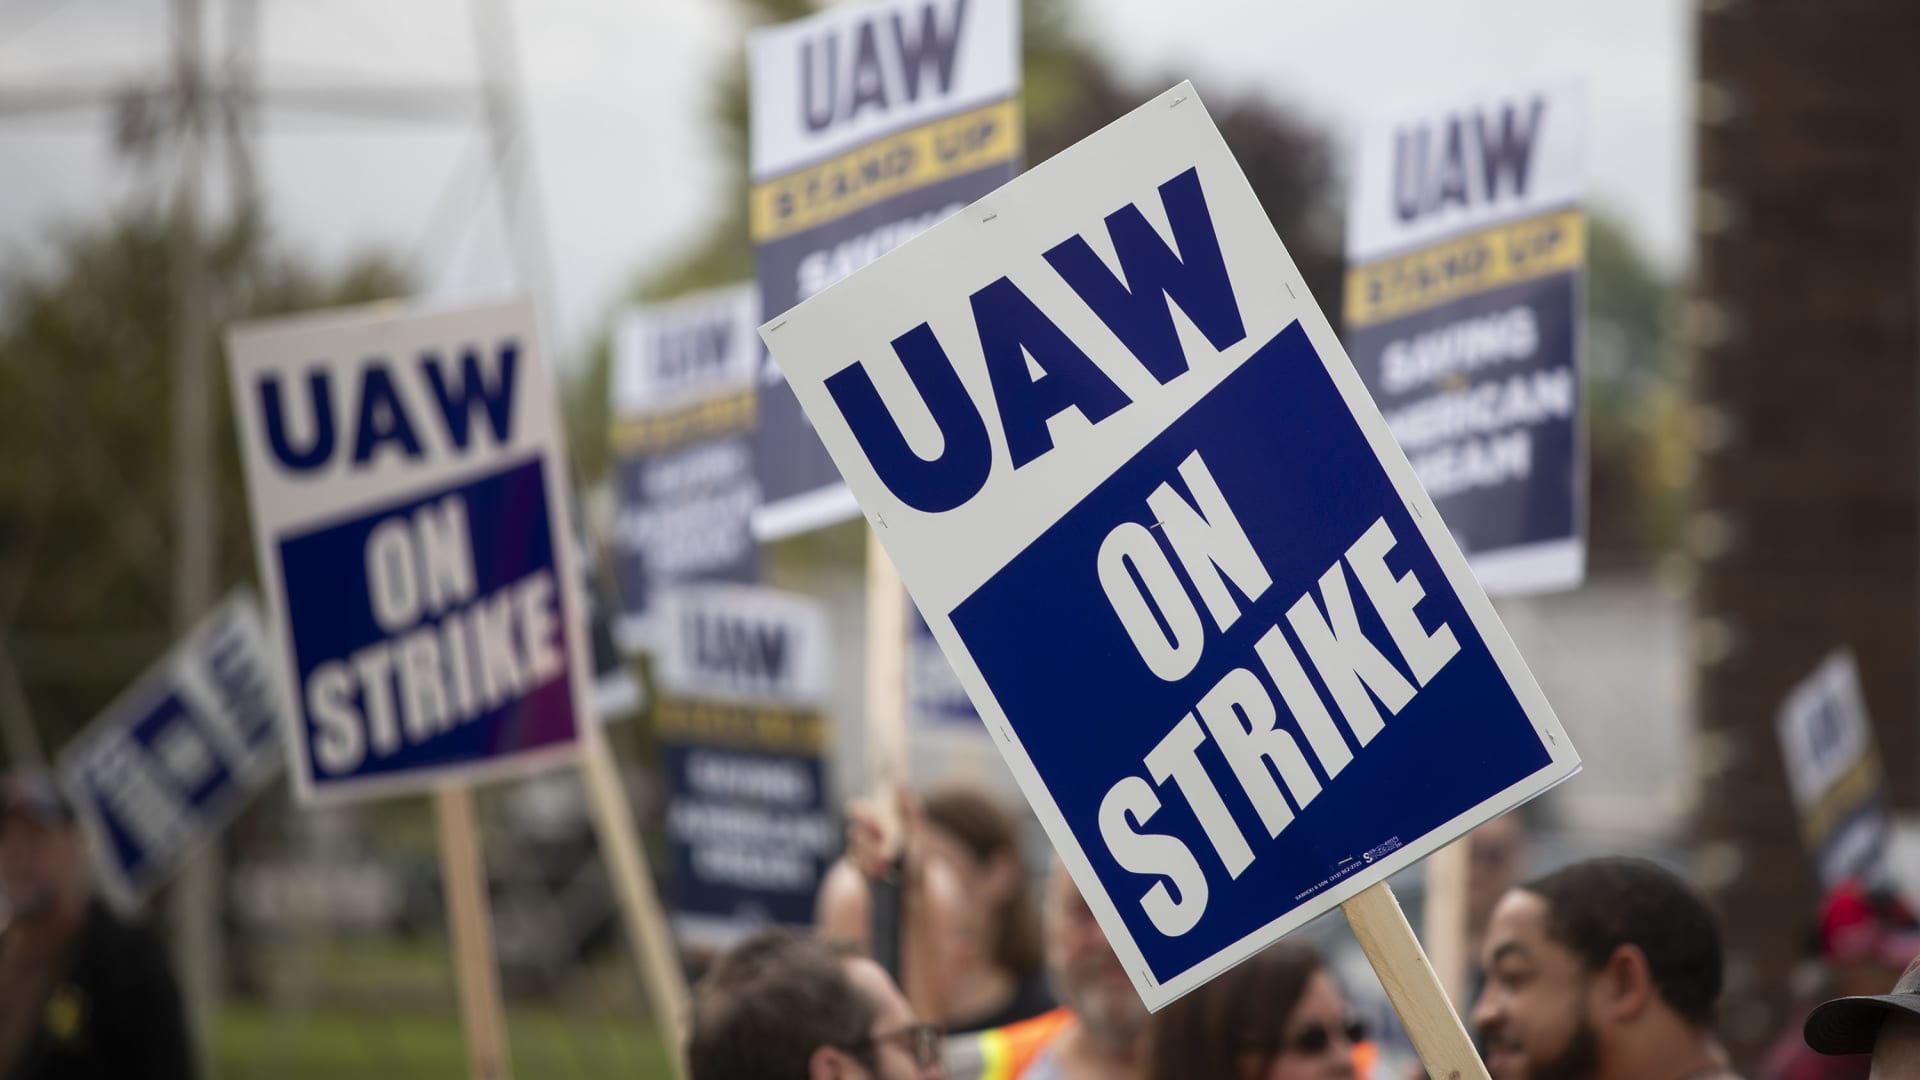 GM's stock hits three-year low amid UAW strike, potential air bag recall